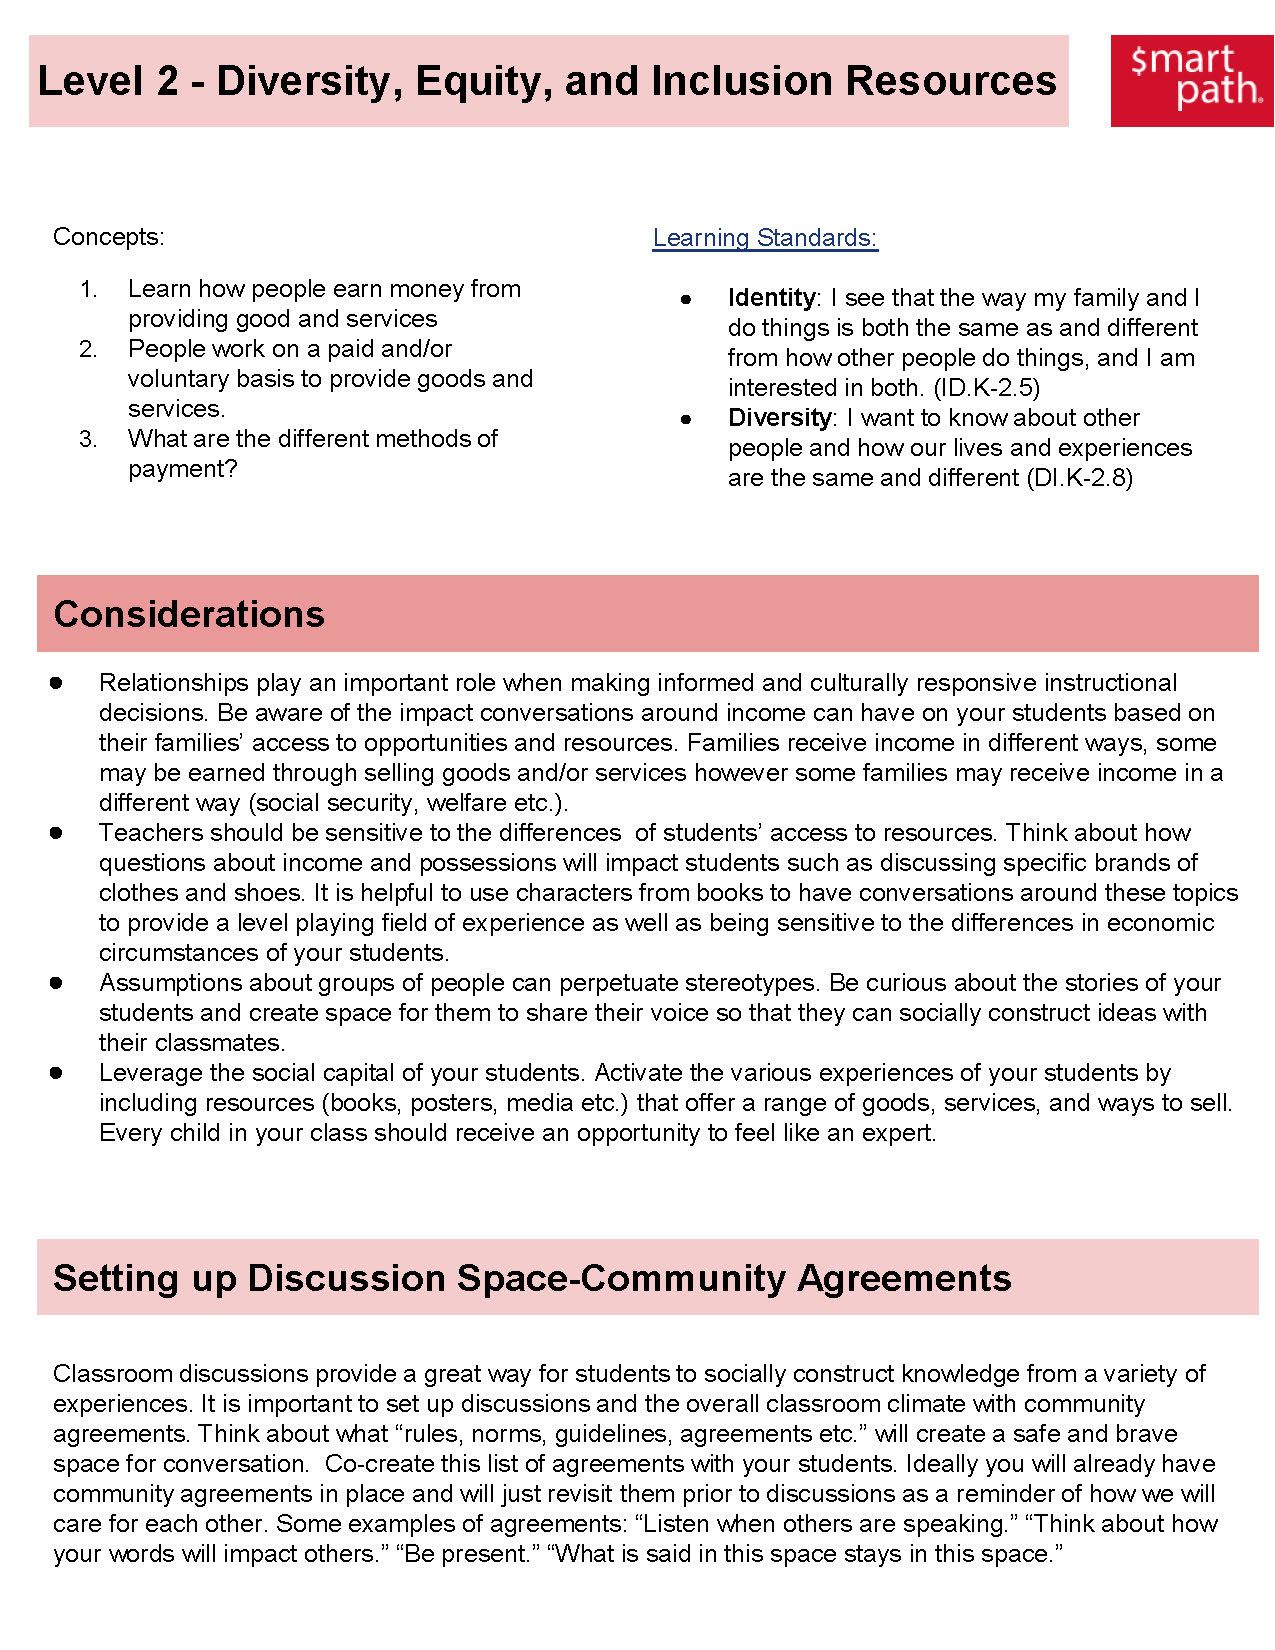 Level Two Diversity and Inclusion Guide_Page_1